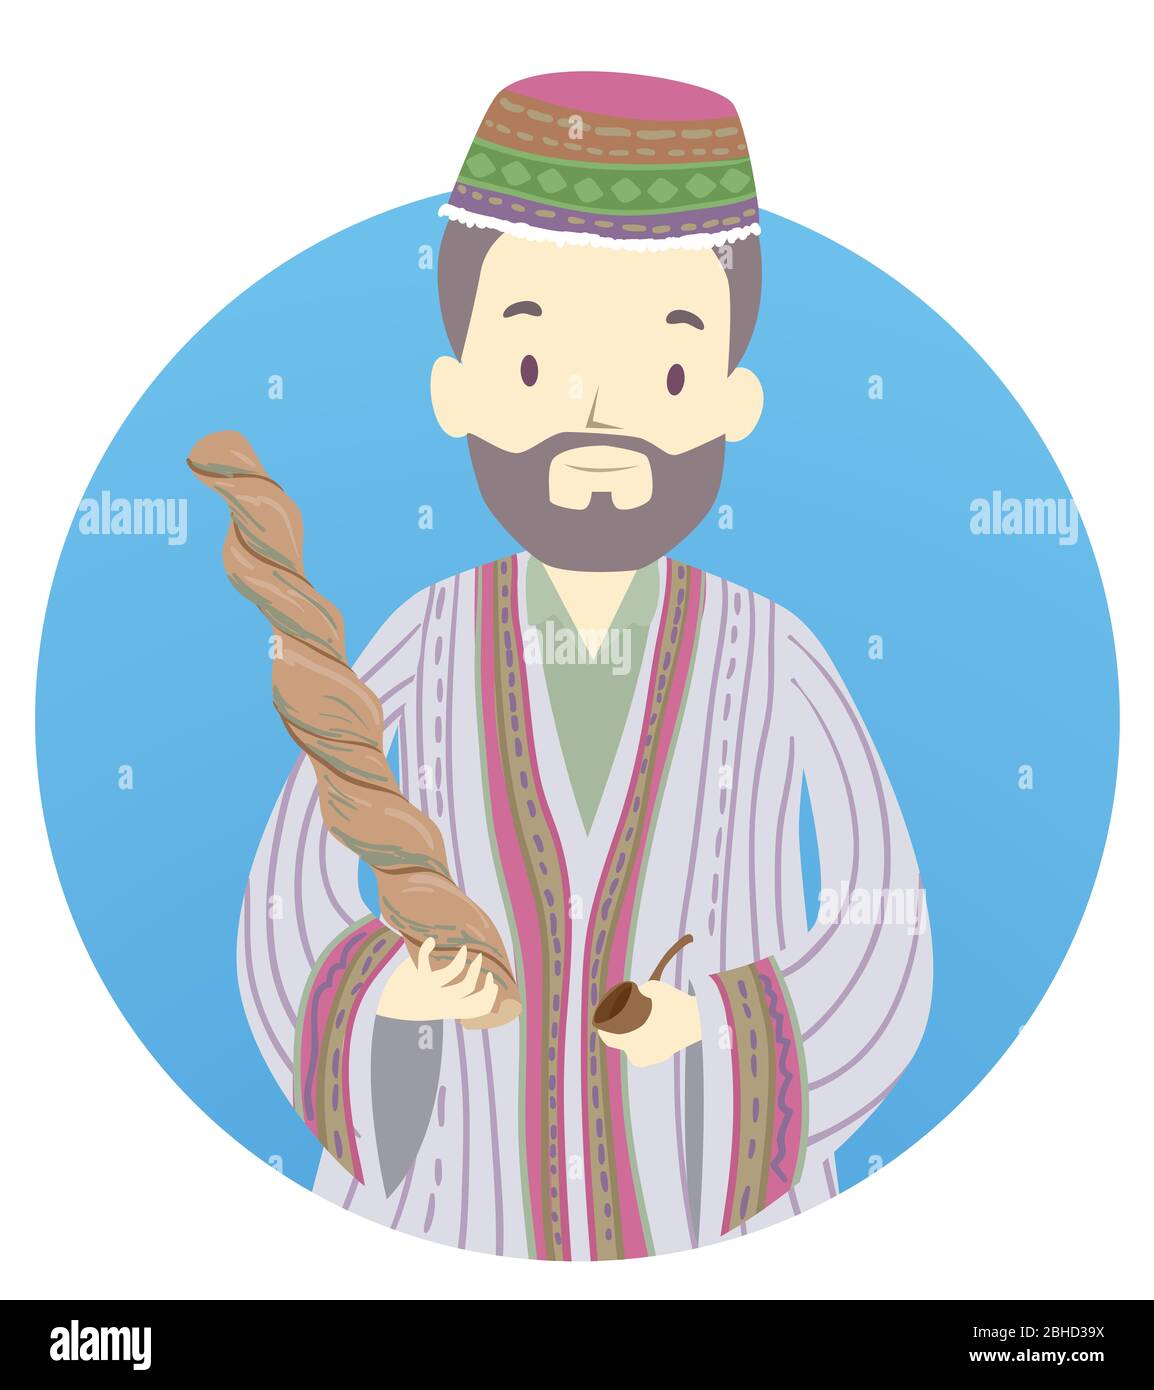 Illustration of a Shaman Man Holding an Ayahuasca Vine and Pipe Stock Photo